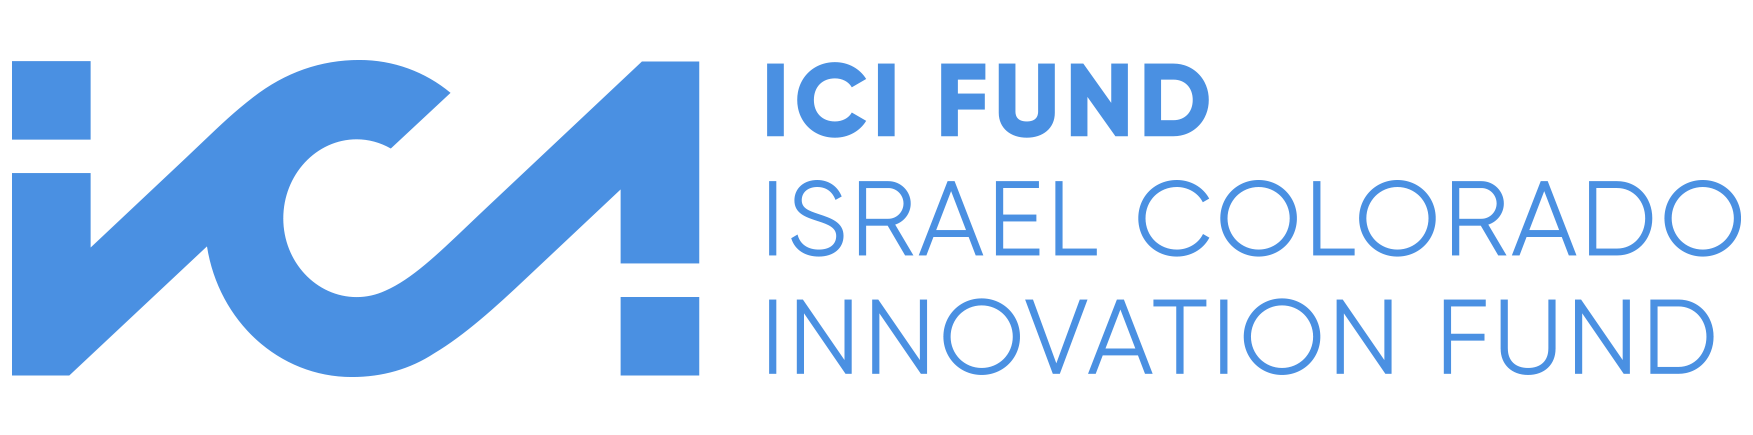 About Israel-Colorado Innovation Fund:
Israel – Colorado Innovation Fund is an early-stage US venture capital fund leading investment rounds in ambitious Israeli entrepreneurs and supporting them in accessing industries in the United States. Innosphere Ventures, Colorado’s leading technology incubator is a partner at ICI Fund and supports the scale up of Israeli companies in the US market.  The Fund was formed to commercialize cutting edge technologies from Israel in Colorado (among other states) creating high quality jobs. 
https://www.ici.fund/ 